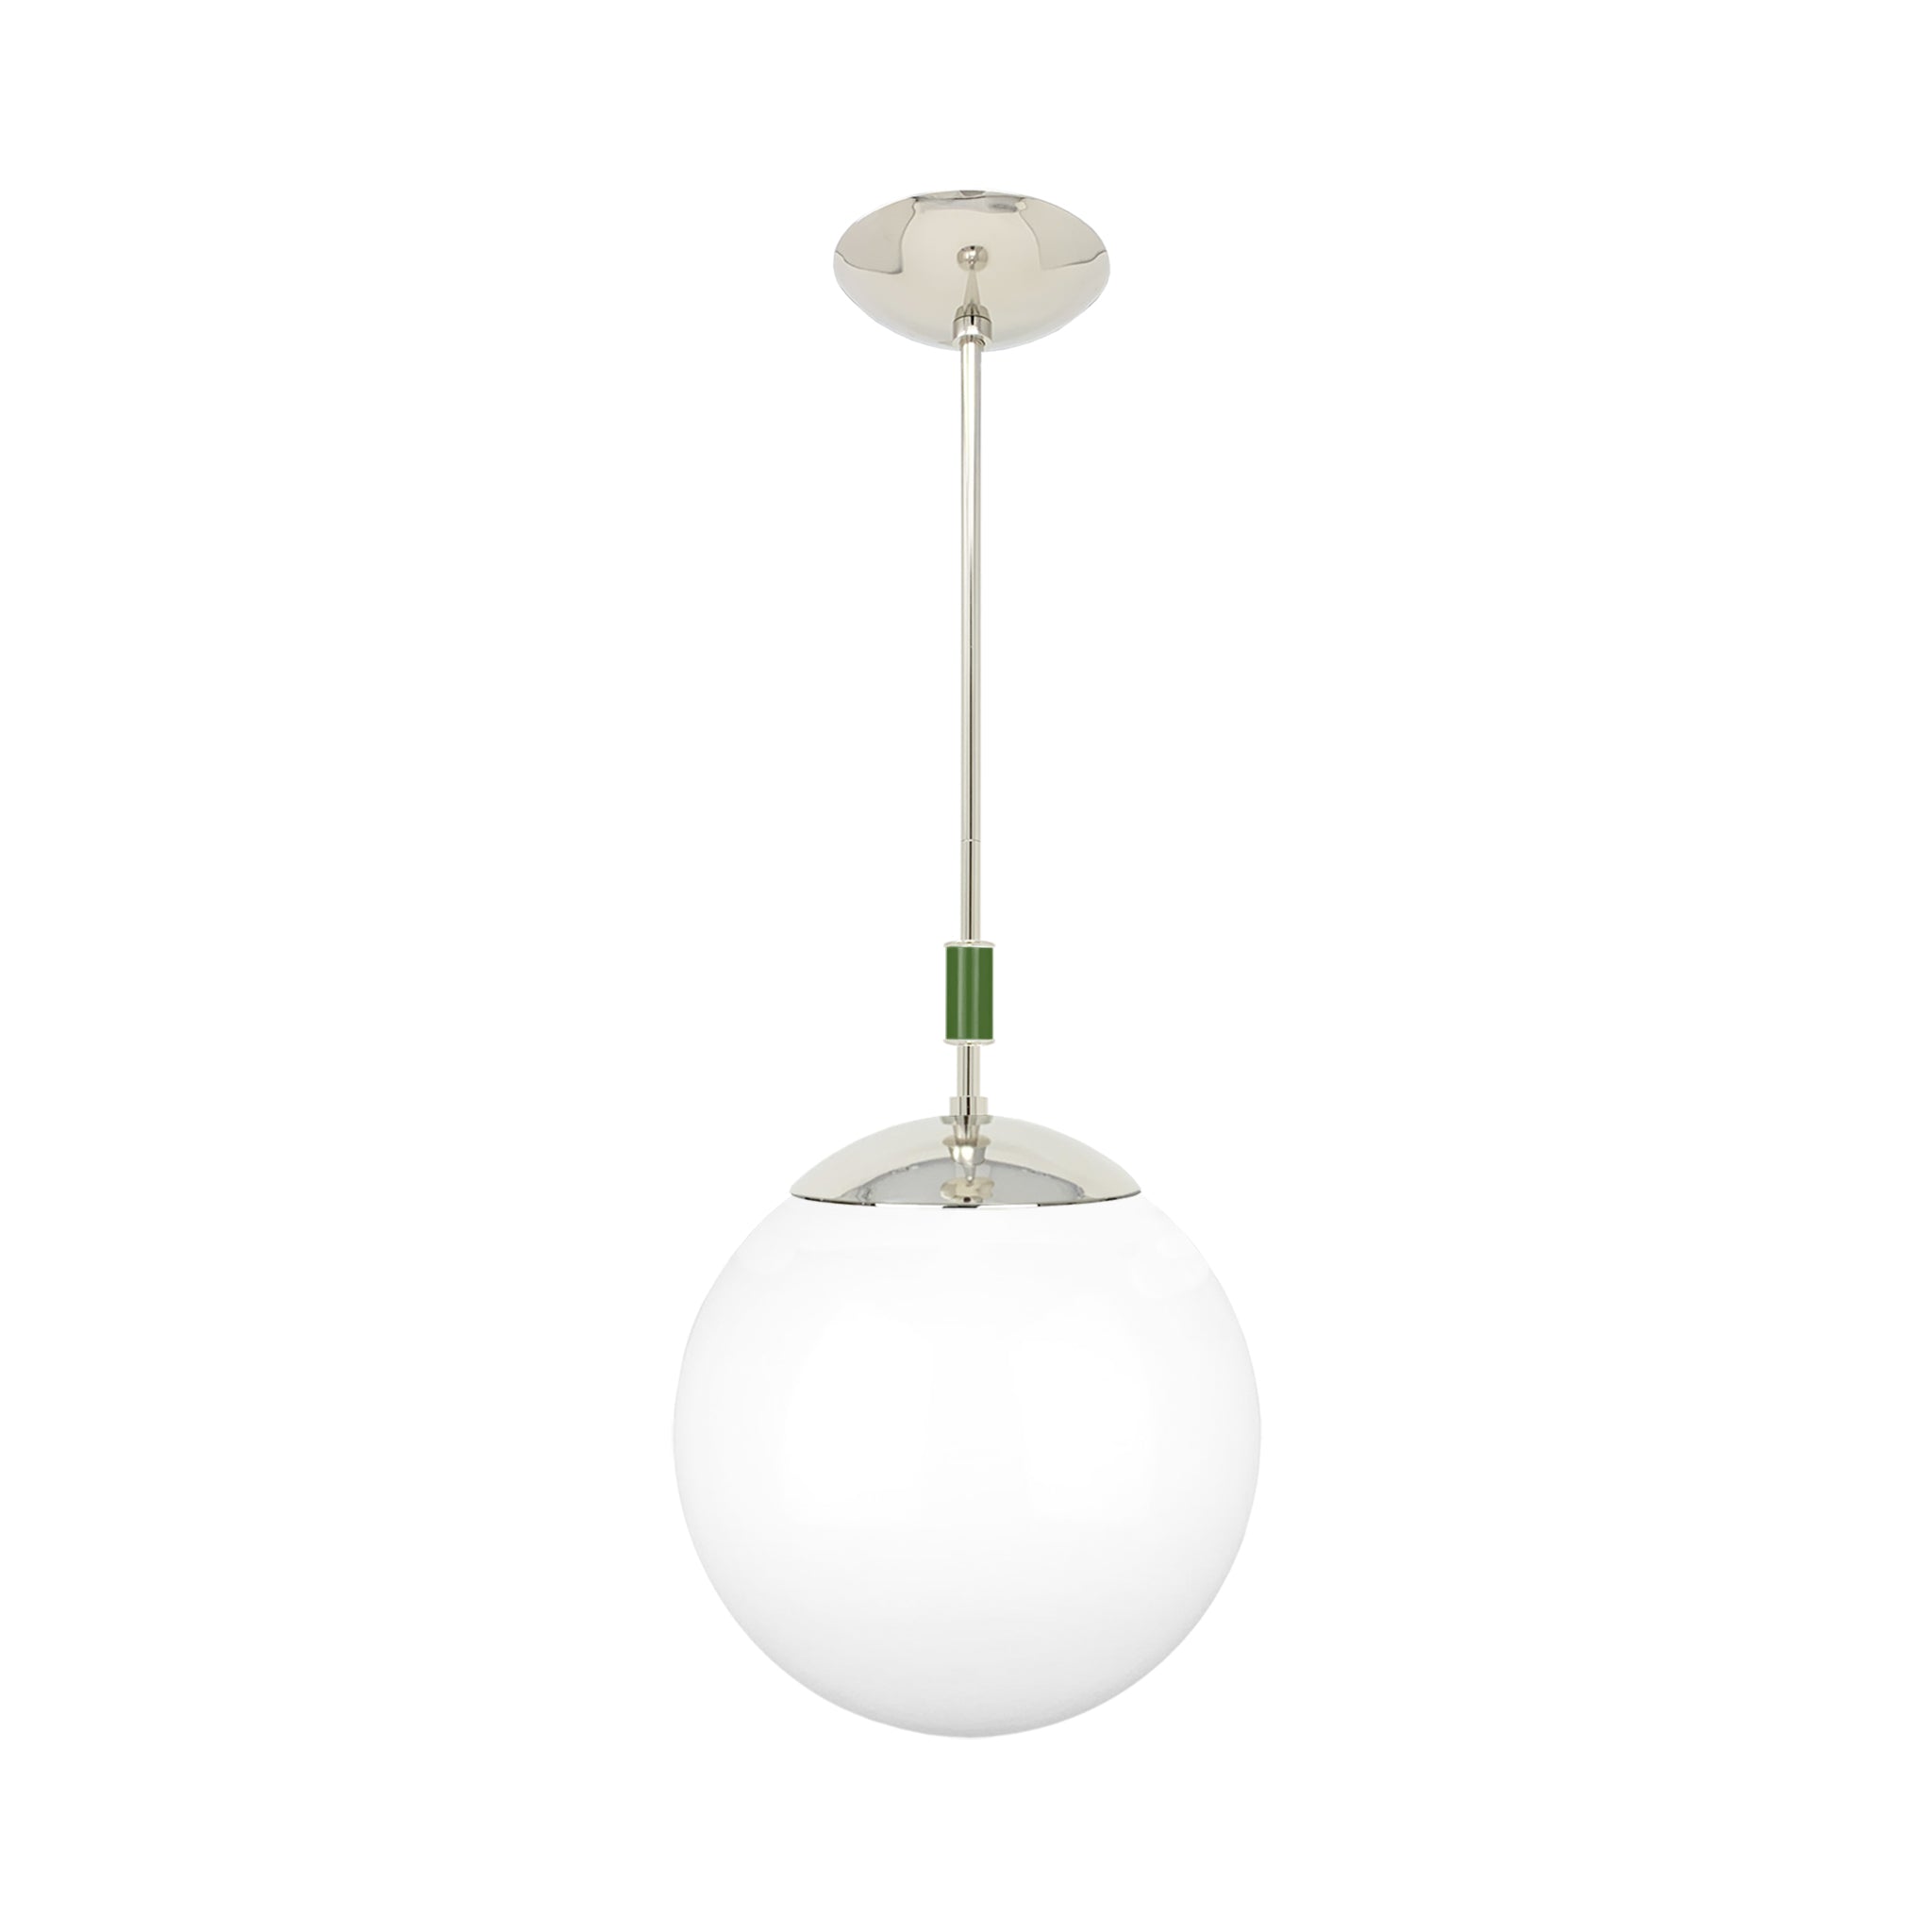 Nickel and python green color Pop pendant 12" Dutton Brown lighting